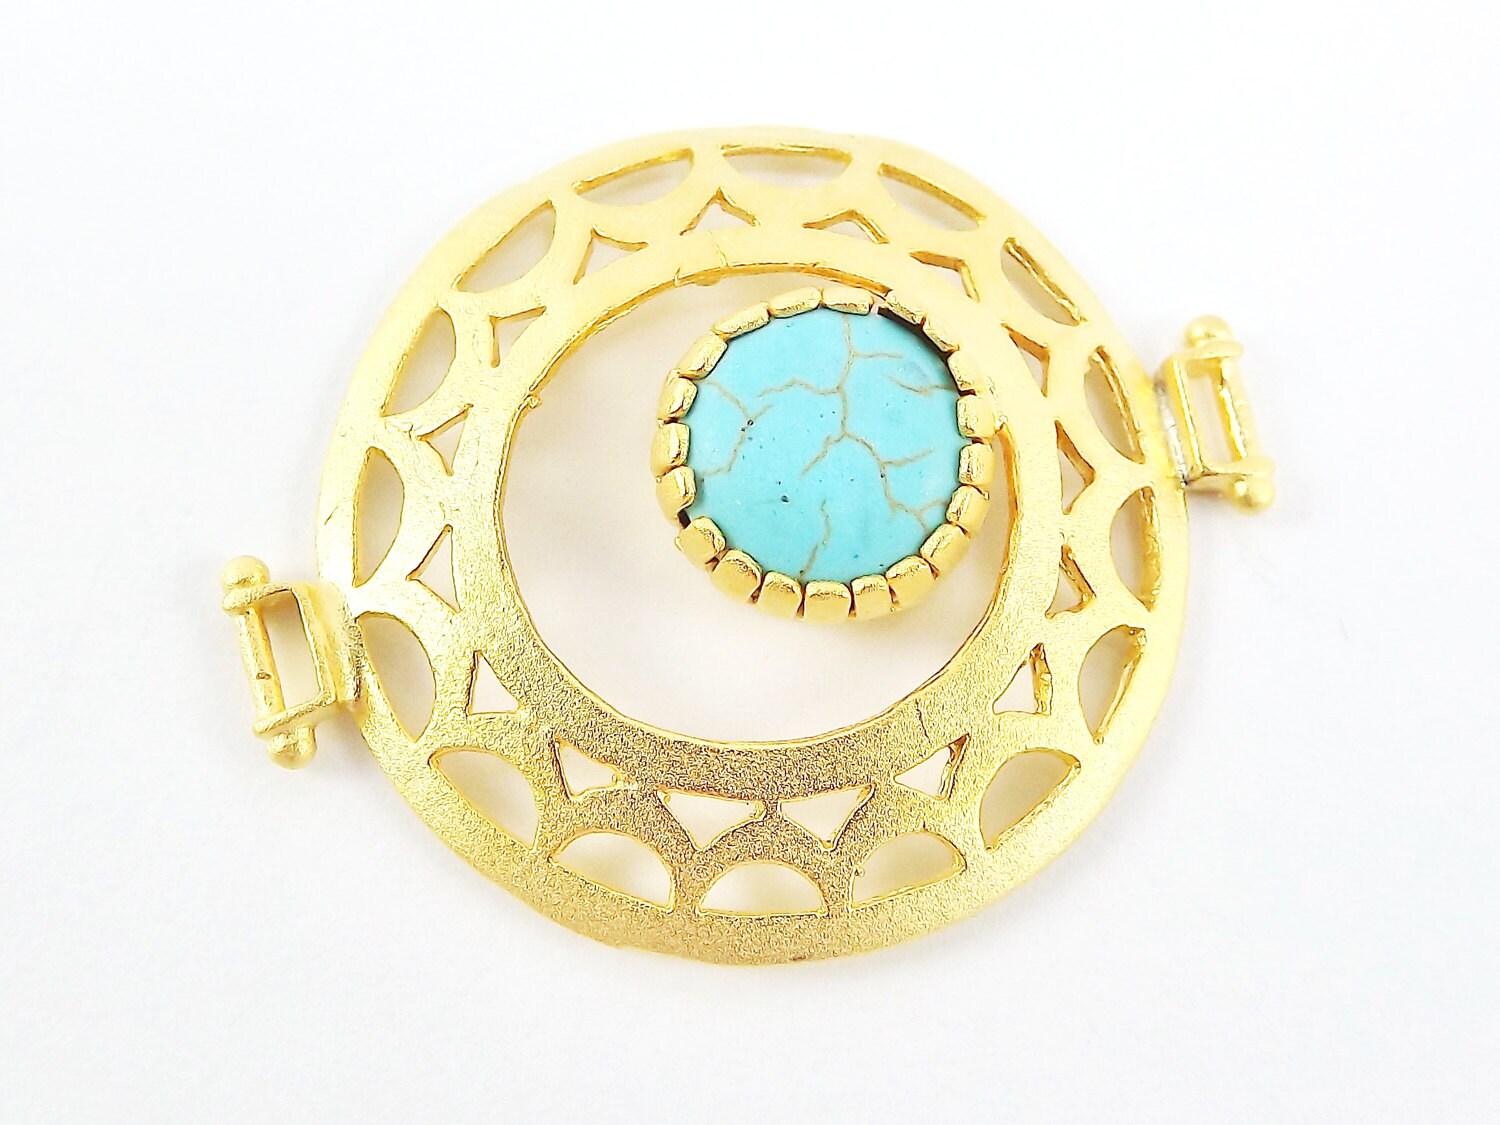 Turquoise Stone Fretworked Circle Connector Pendant - 22k Matte Gold Plated - 1PC